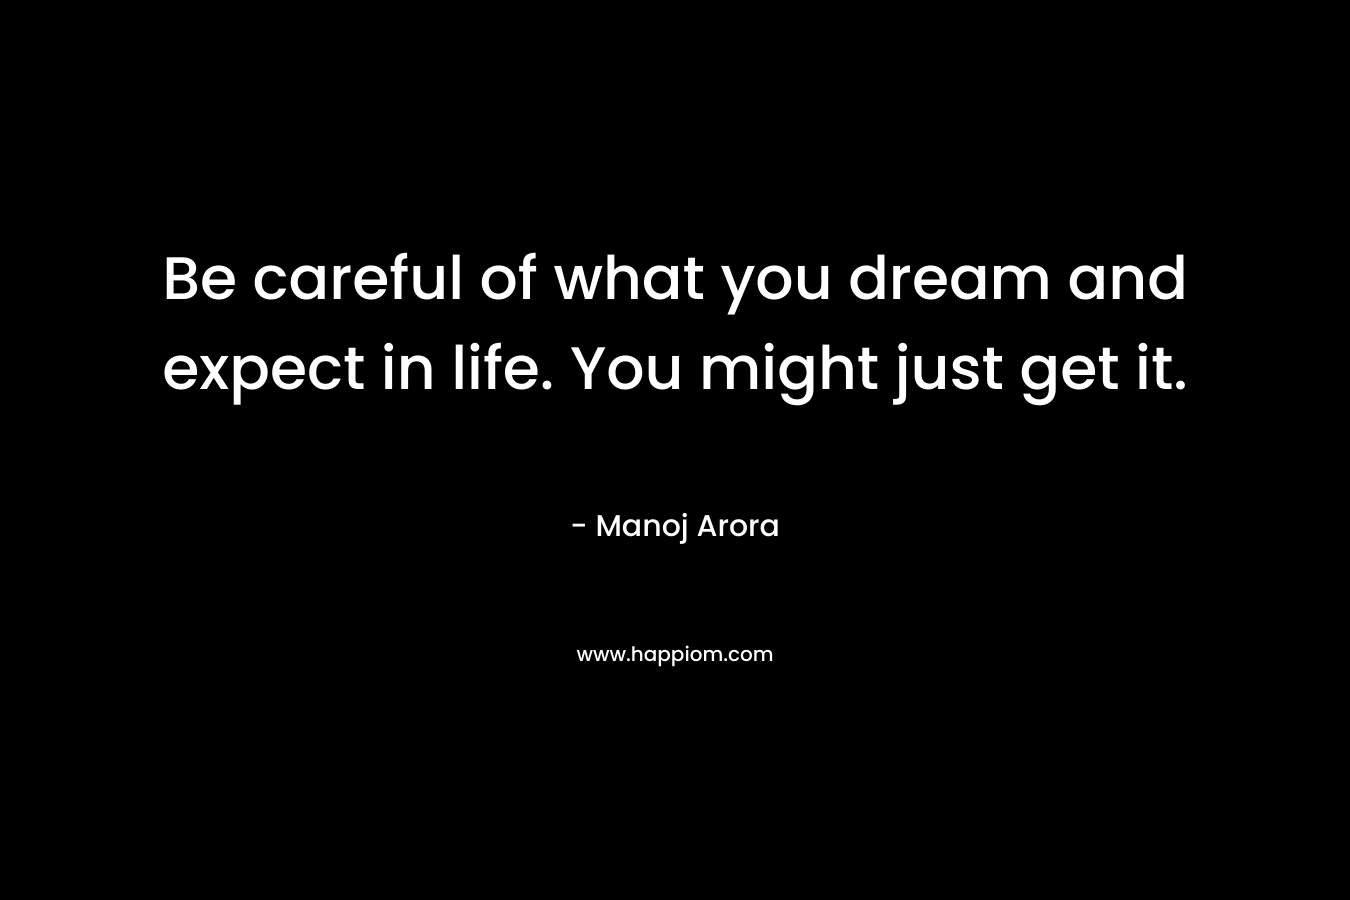 Be careful of what you dream and expect in life. You might just get it.